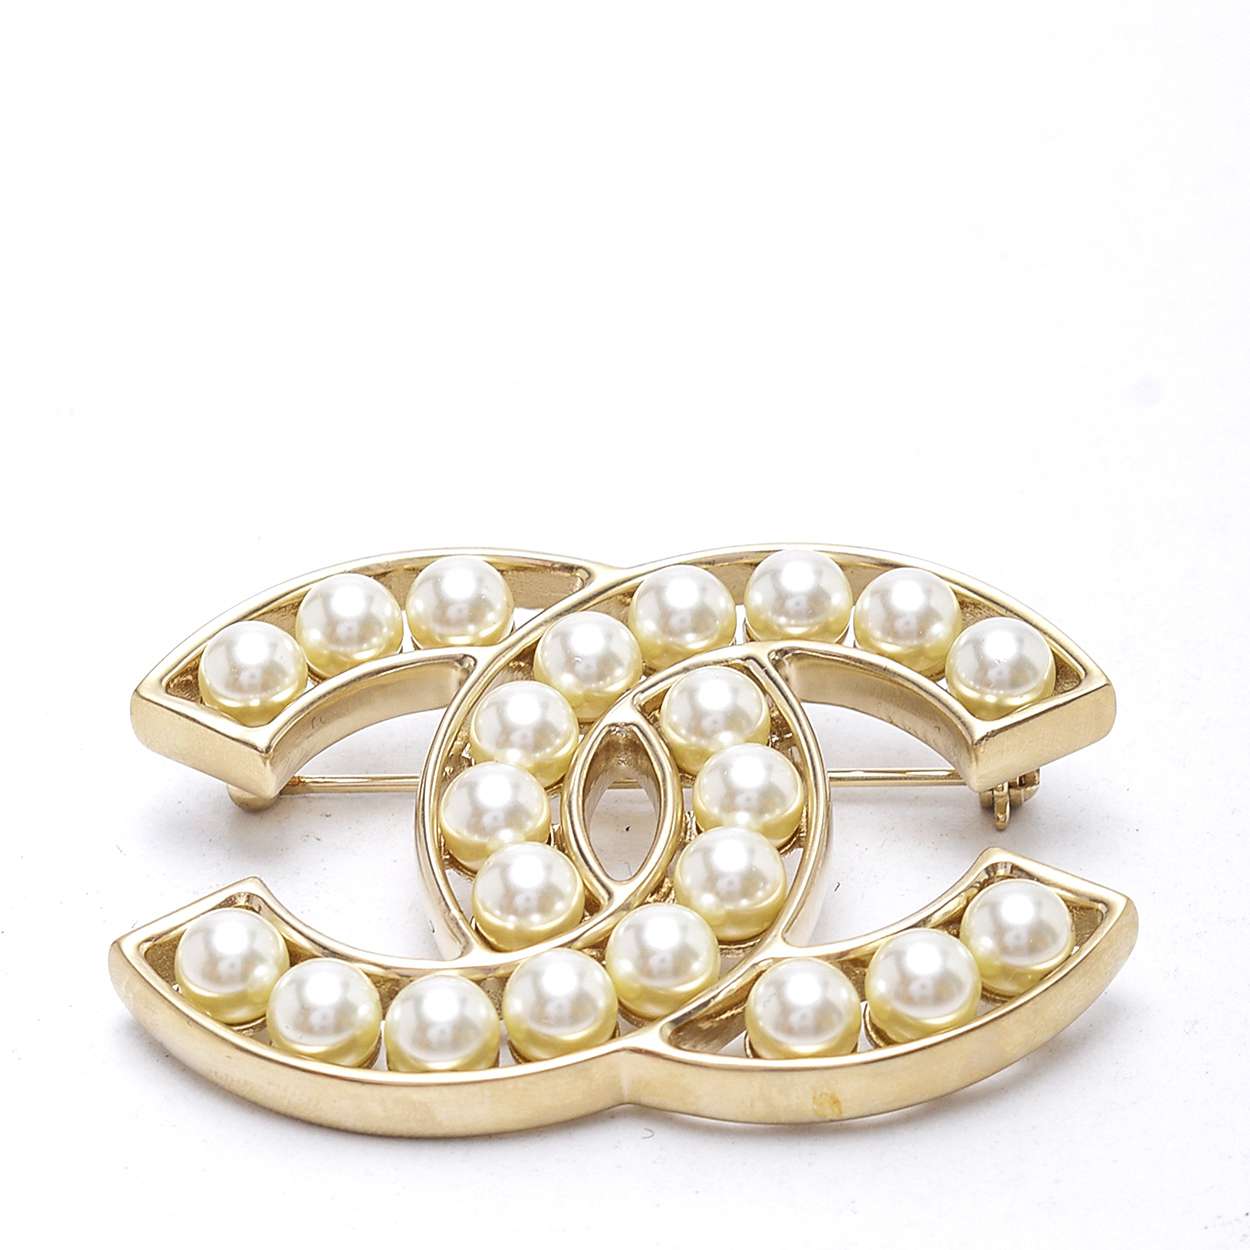 Chanel - White Pearls Cc Brooch 